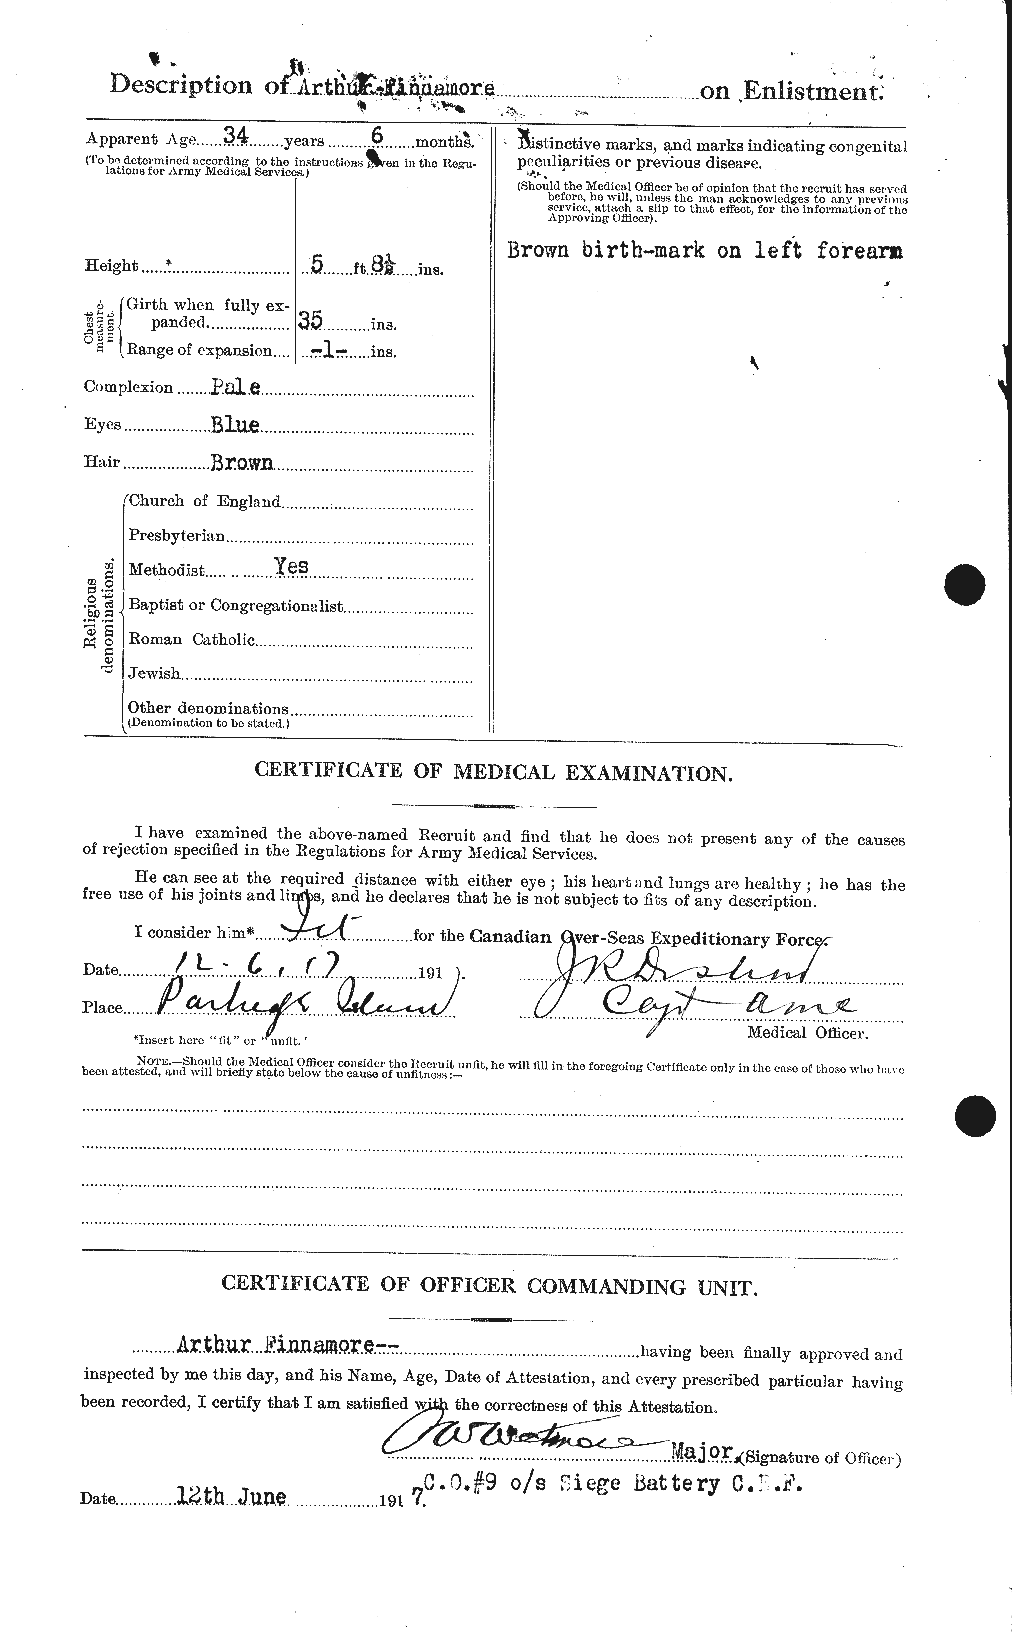 Personnel Records of the First World War - CEF 328535b